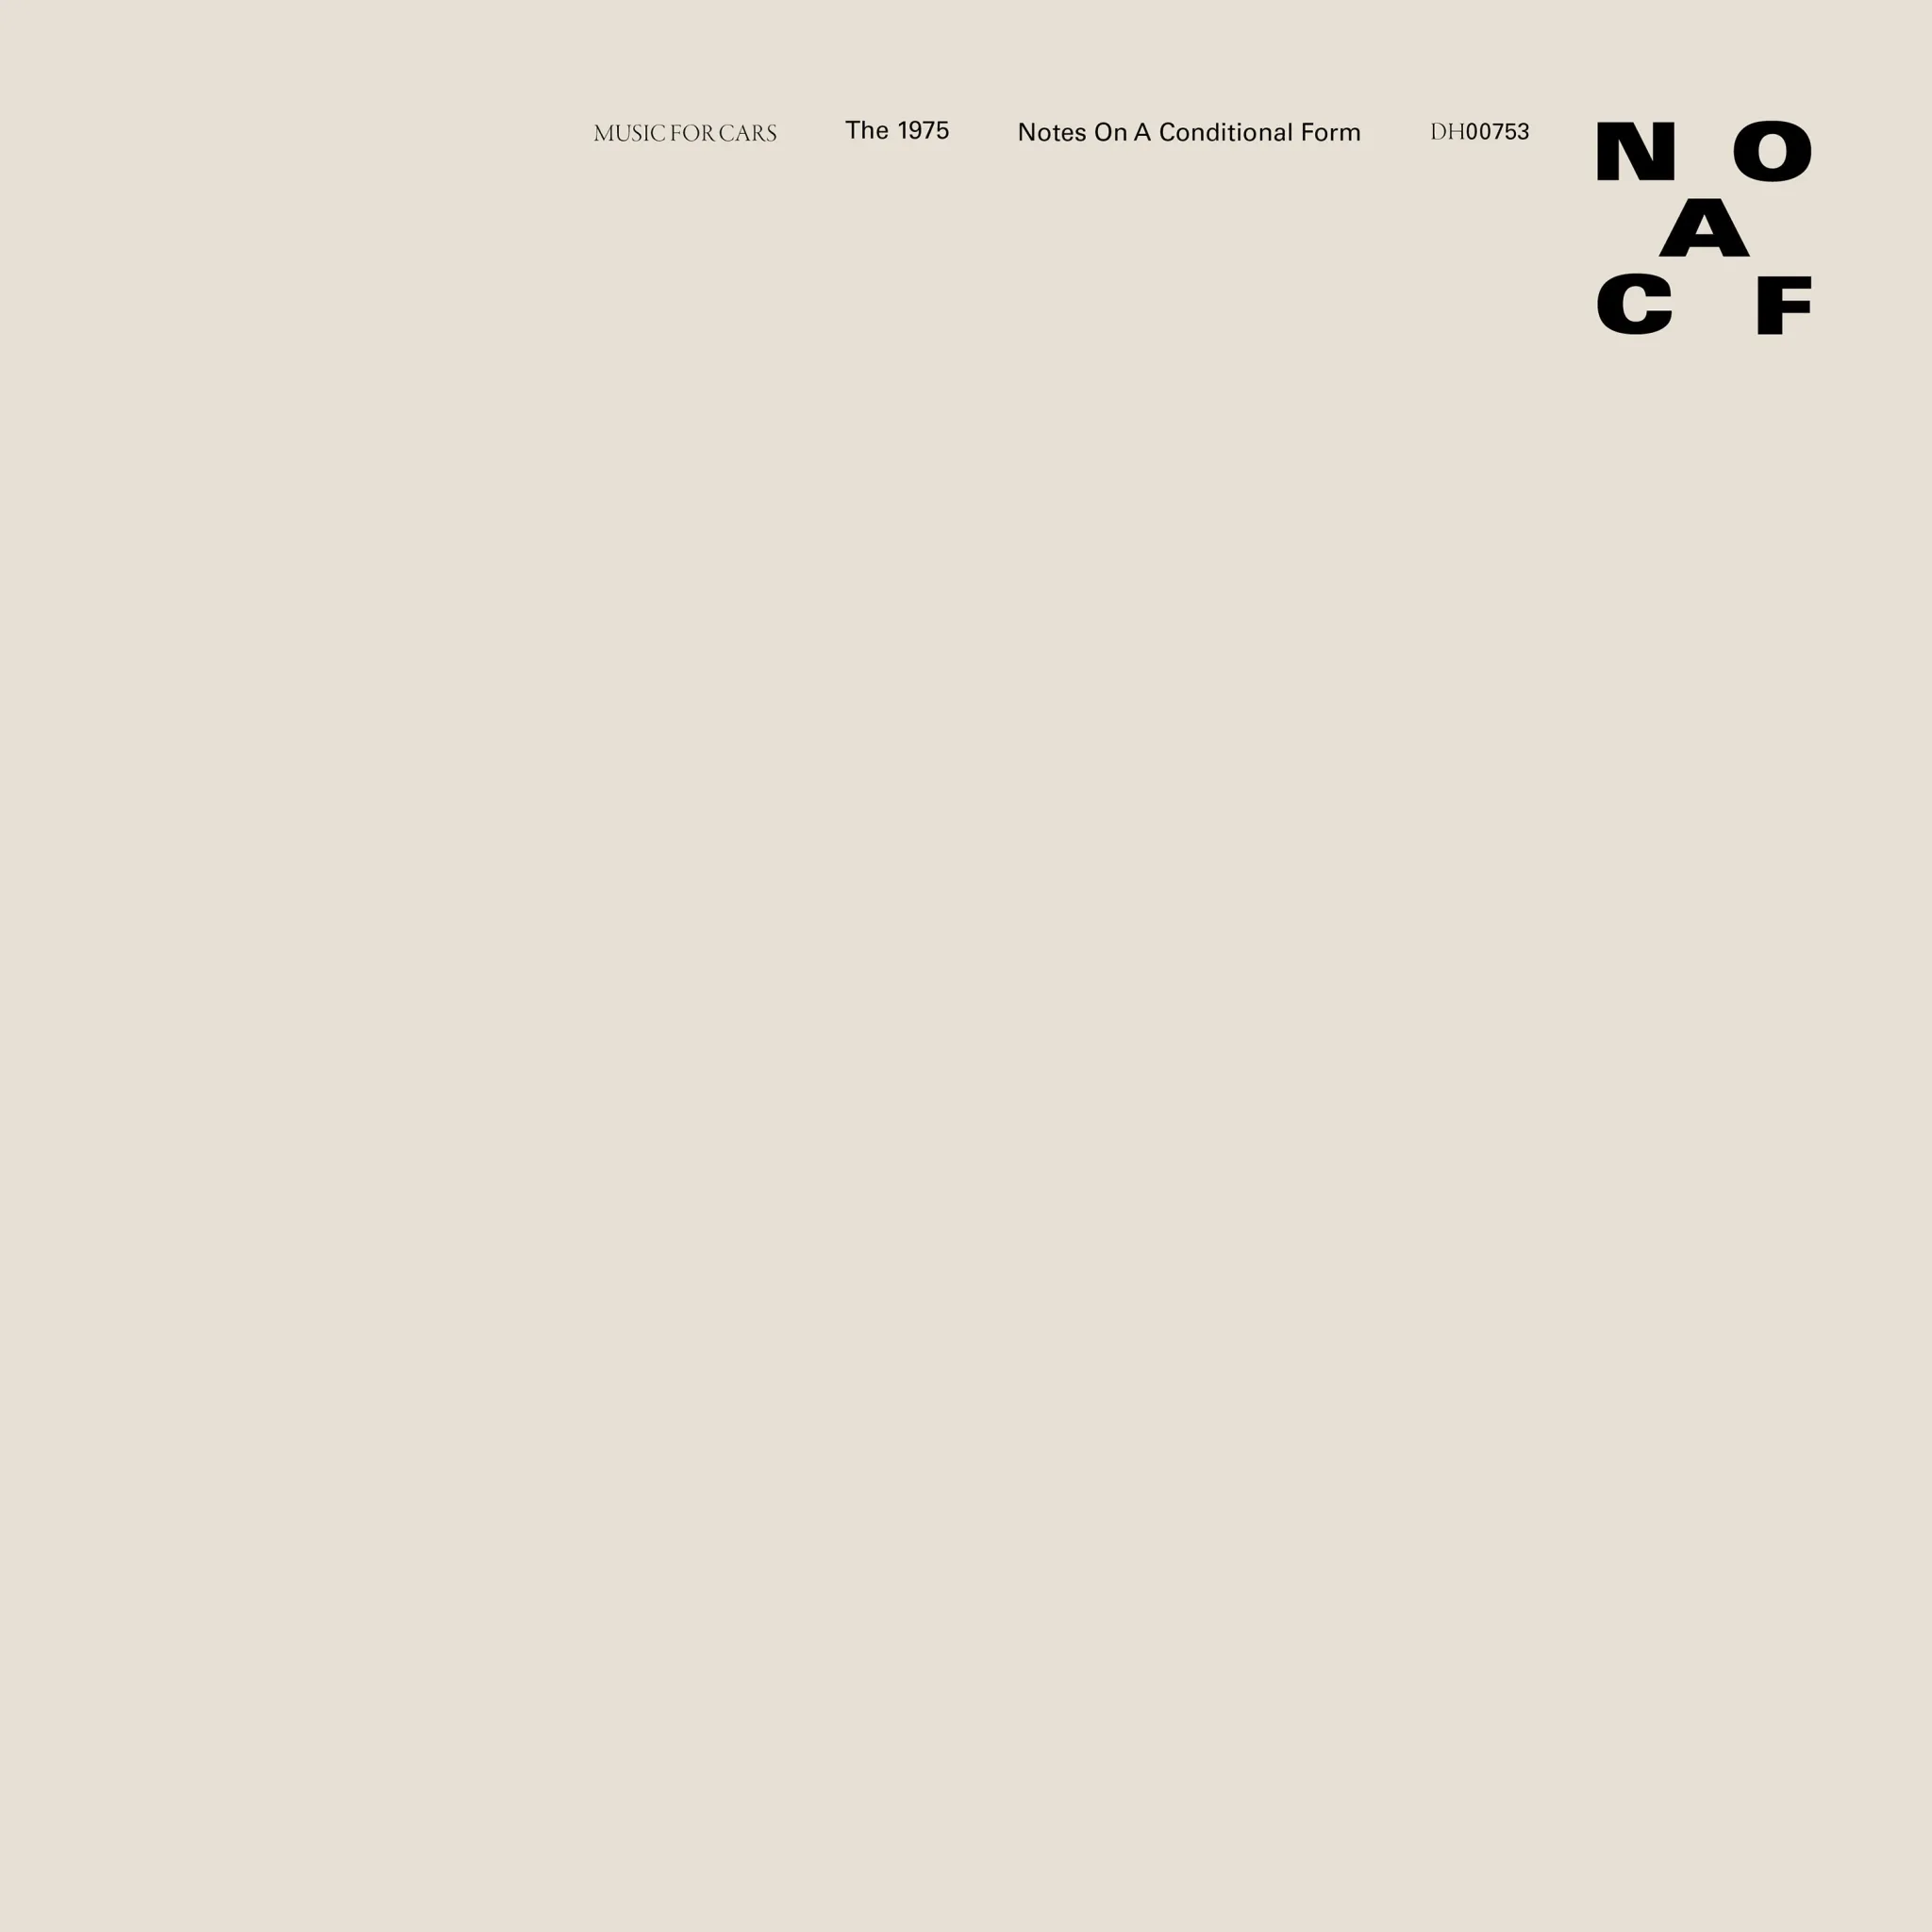 <strong>The 1975 - Notes On A Conditional Form</strong> (Vinyl LP - clear)